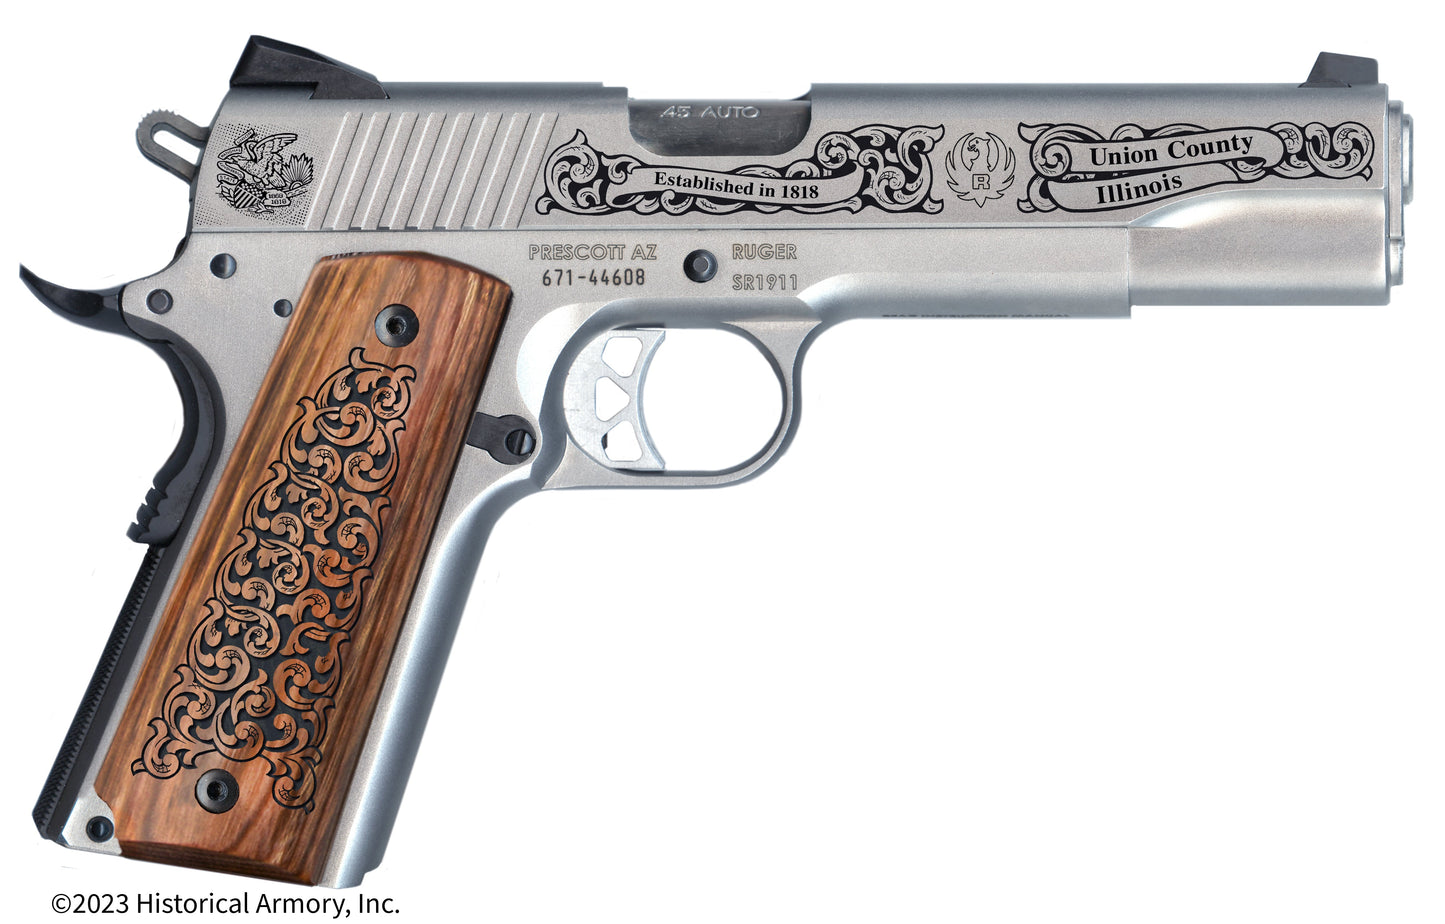 Union County Illinois Engraved .45 Auto Ruger 1911